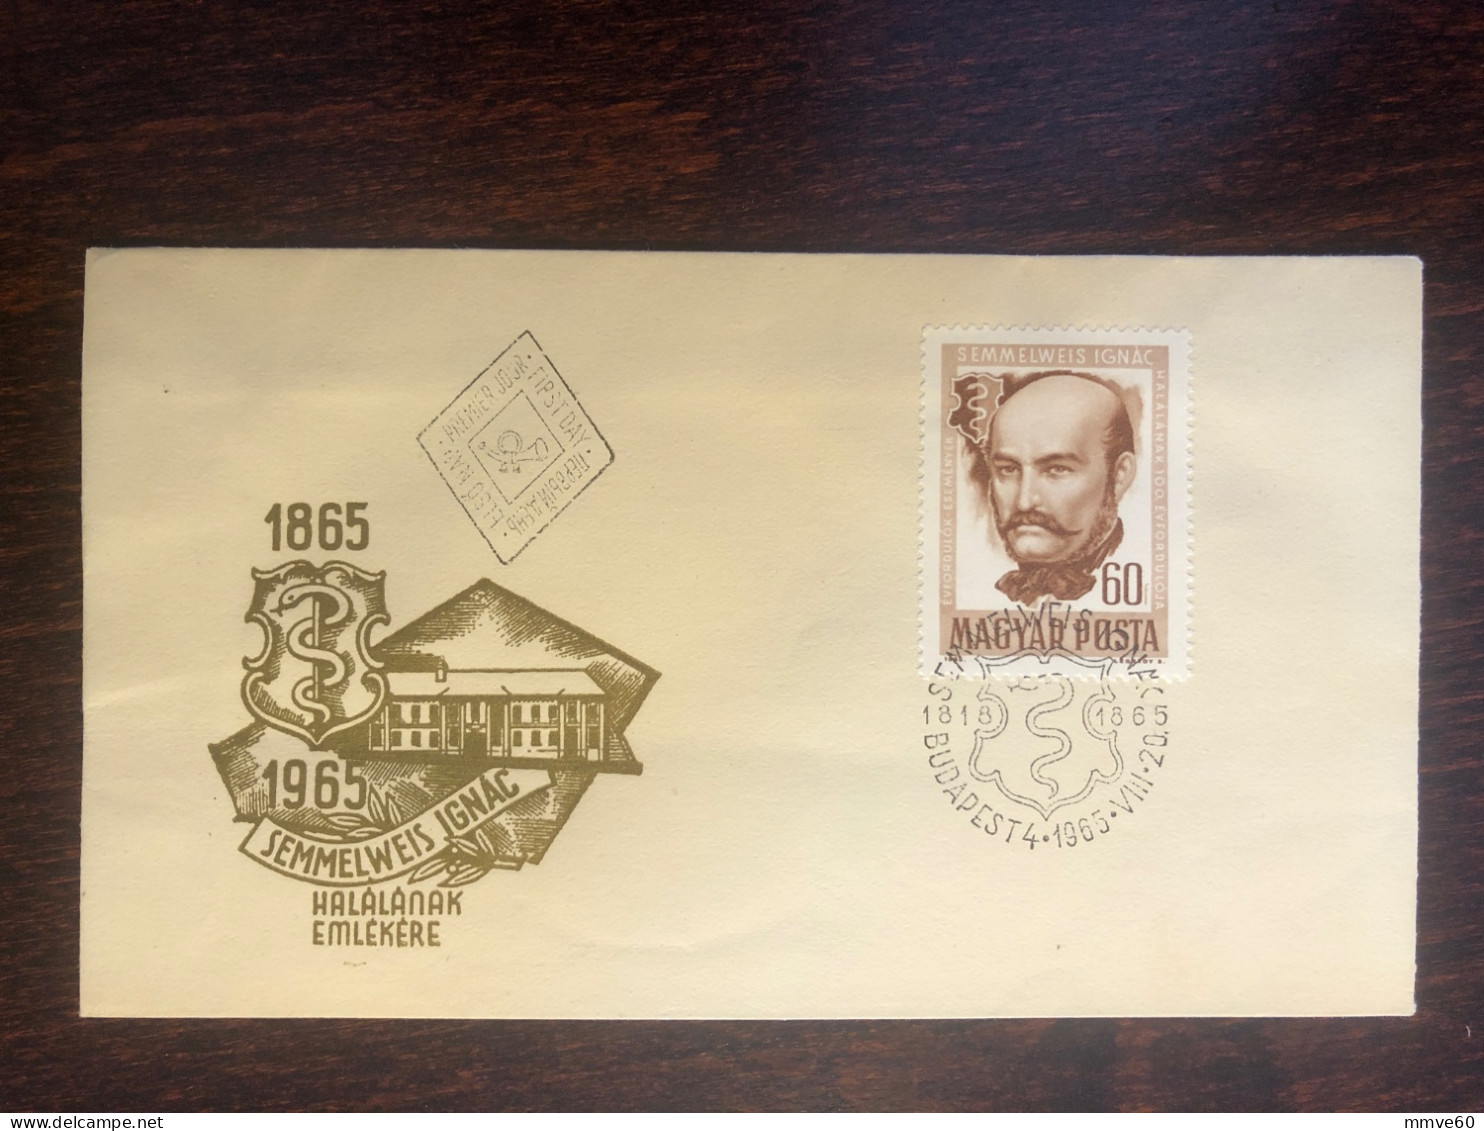 HUNGARY FDC COVER 1965 YEAR DOCTOR SEMMELWEIS GYNECOLOGY OBSTETRICS HEALTH MEDICINE STAMPS - FDC